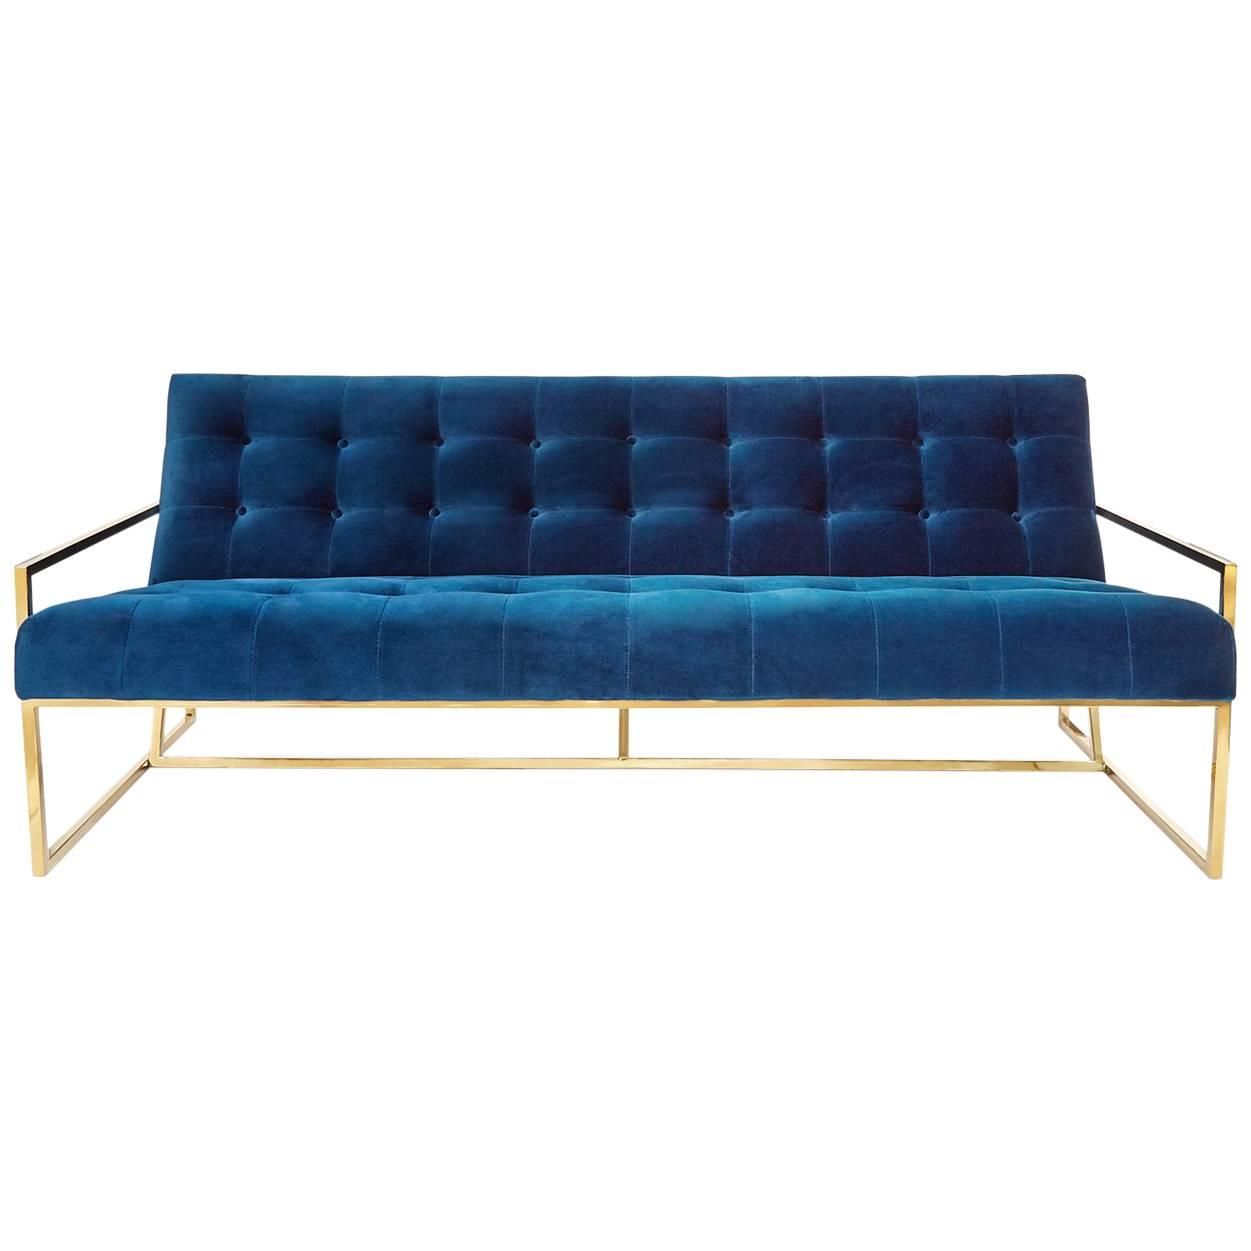 Jonathan Adler Furniture – 150 For Sale At 1stdibs Within Alder Grande Ii Sofa Chairs (View 23 of 25)